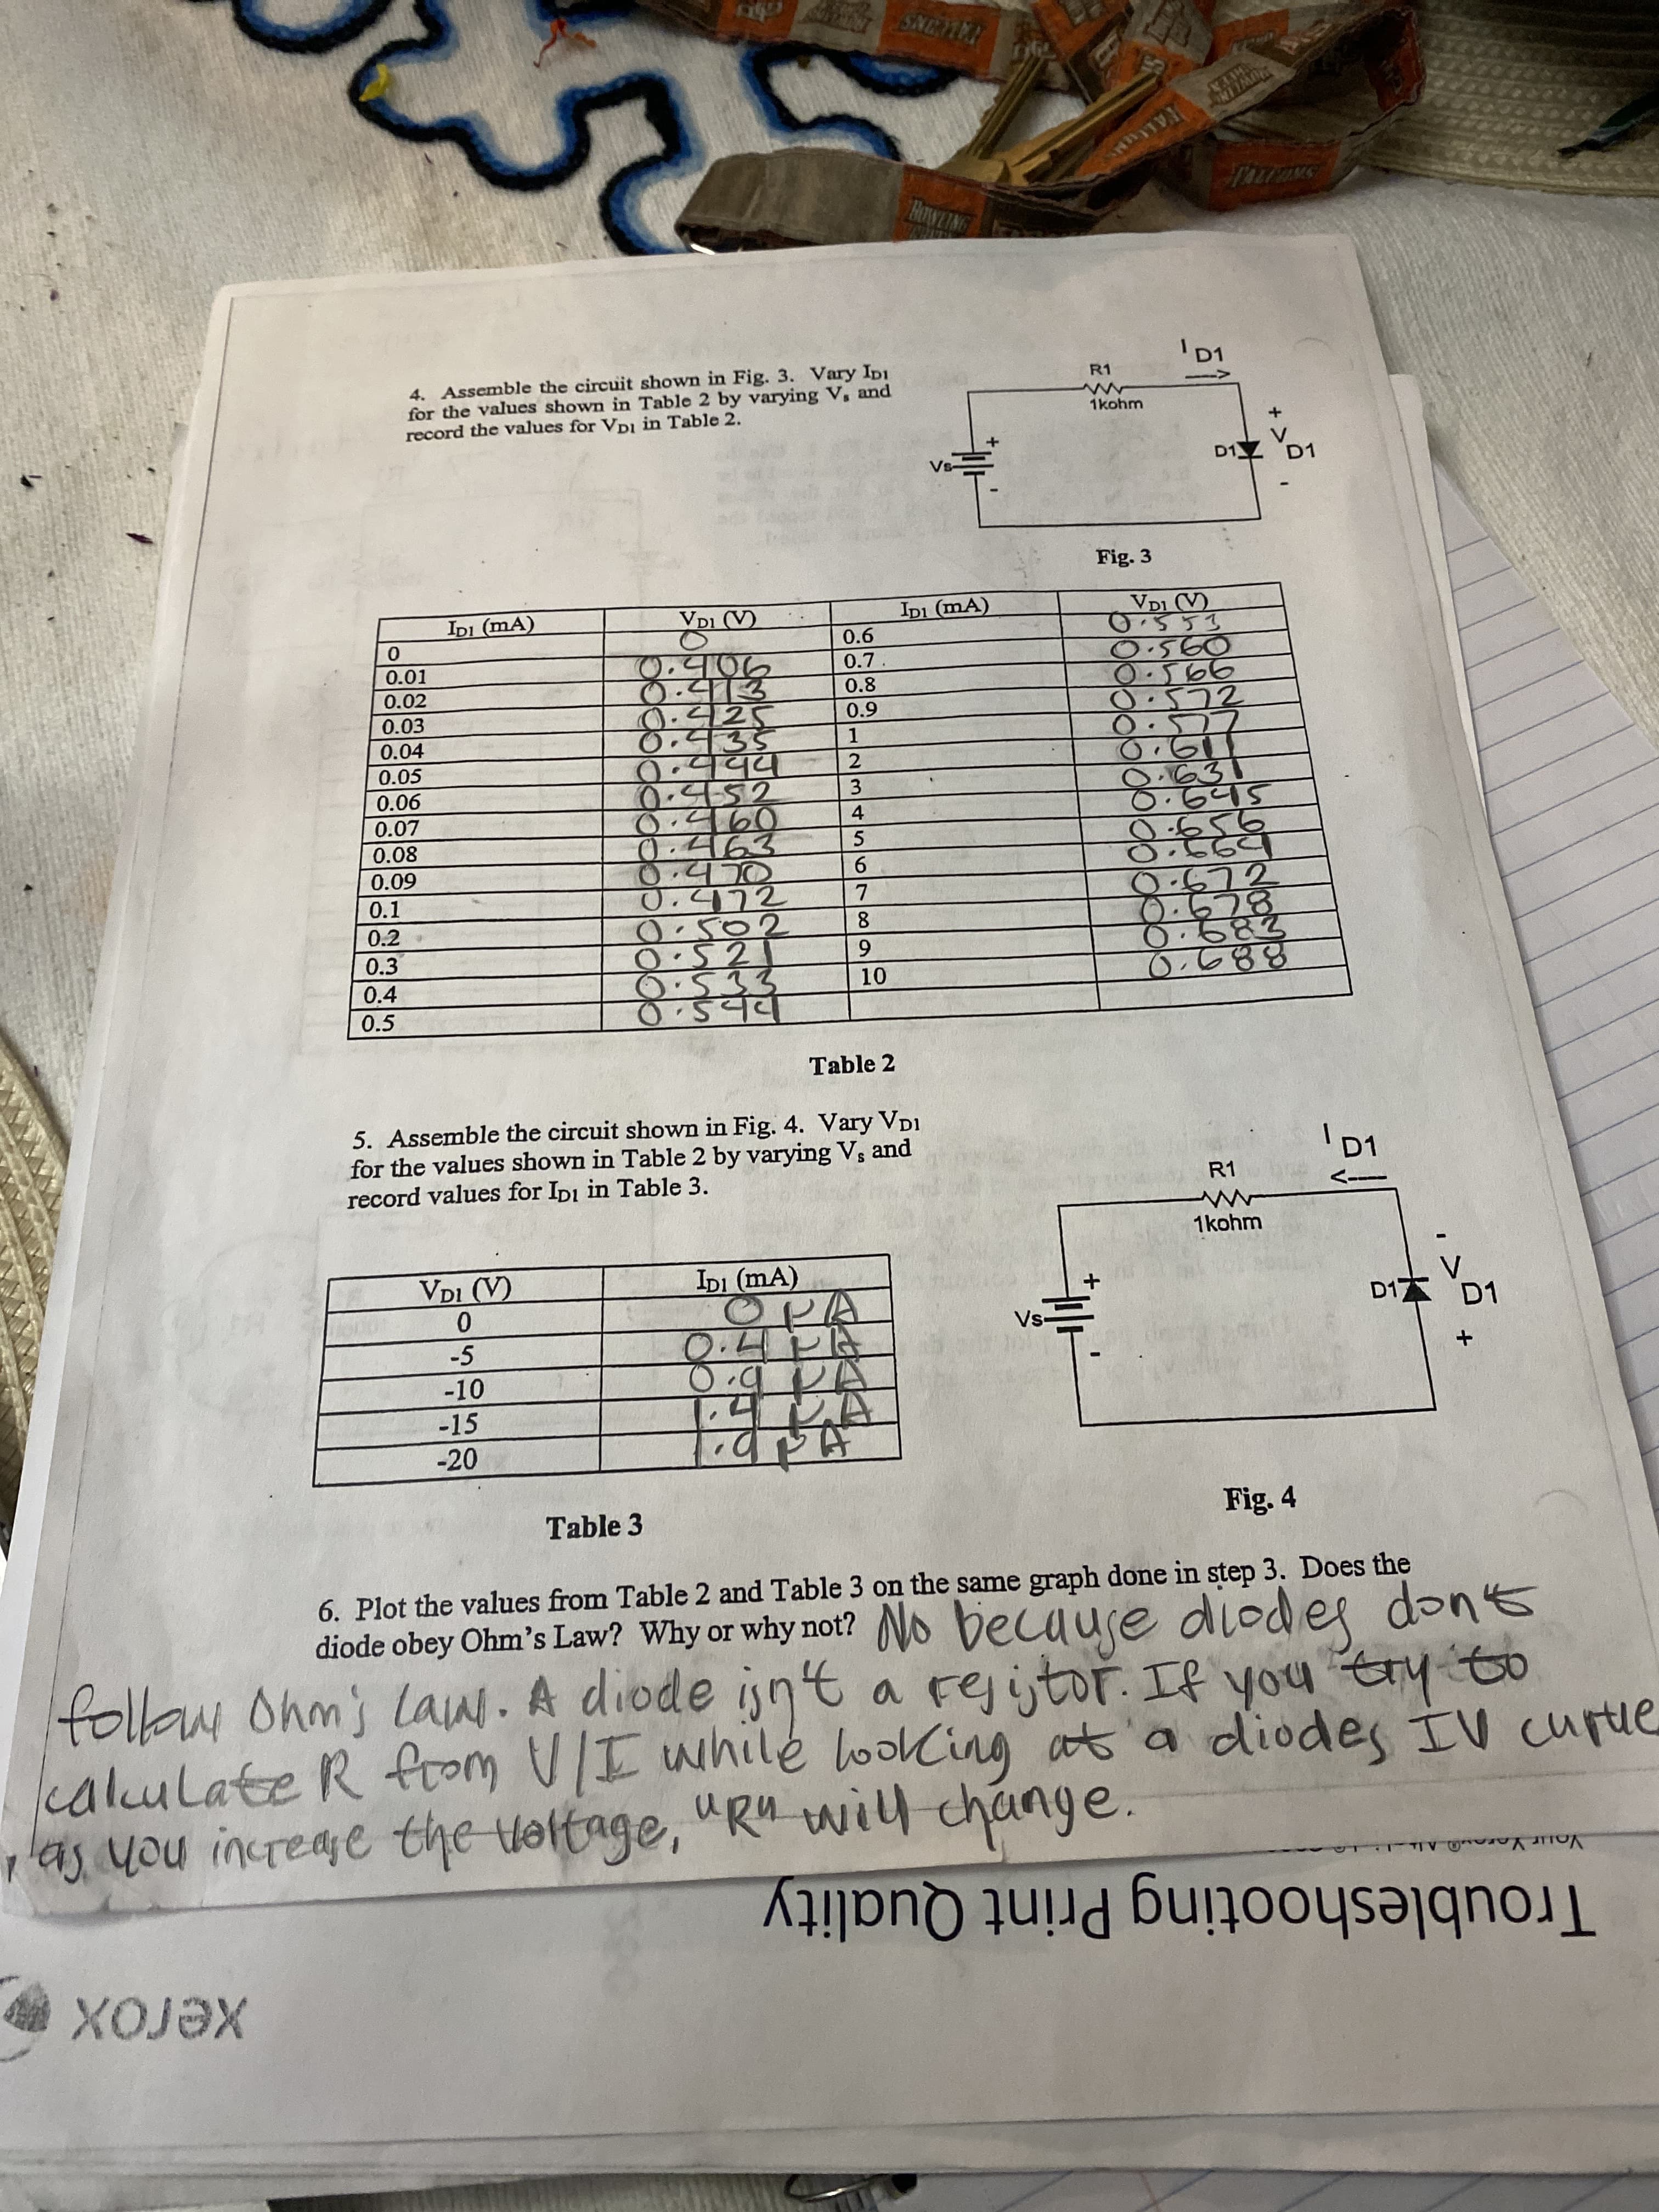 Table 3
6. Plot the values from Table 2 and Table 3 on the same graph done in step 3. Does the
diode obey don't
Ohm's Law? Why or why not? No because diodes
nde in4
relitor Te vou tryto
